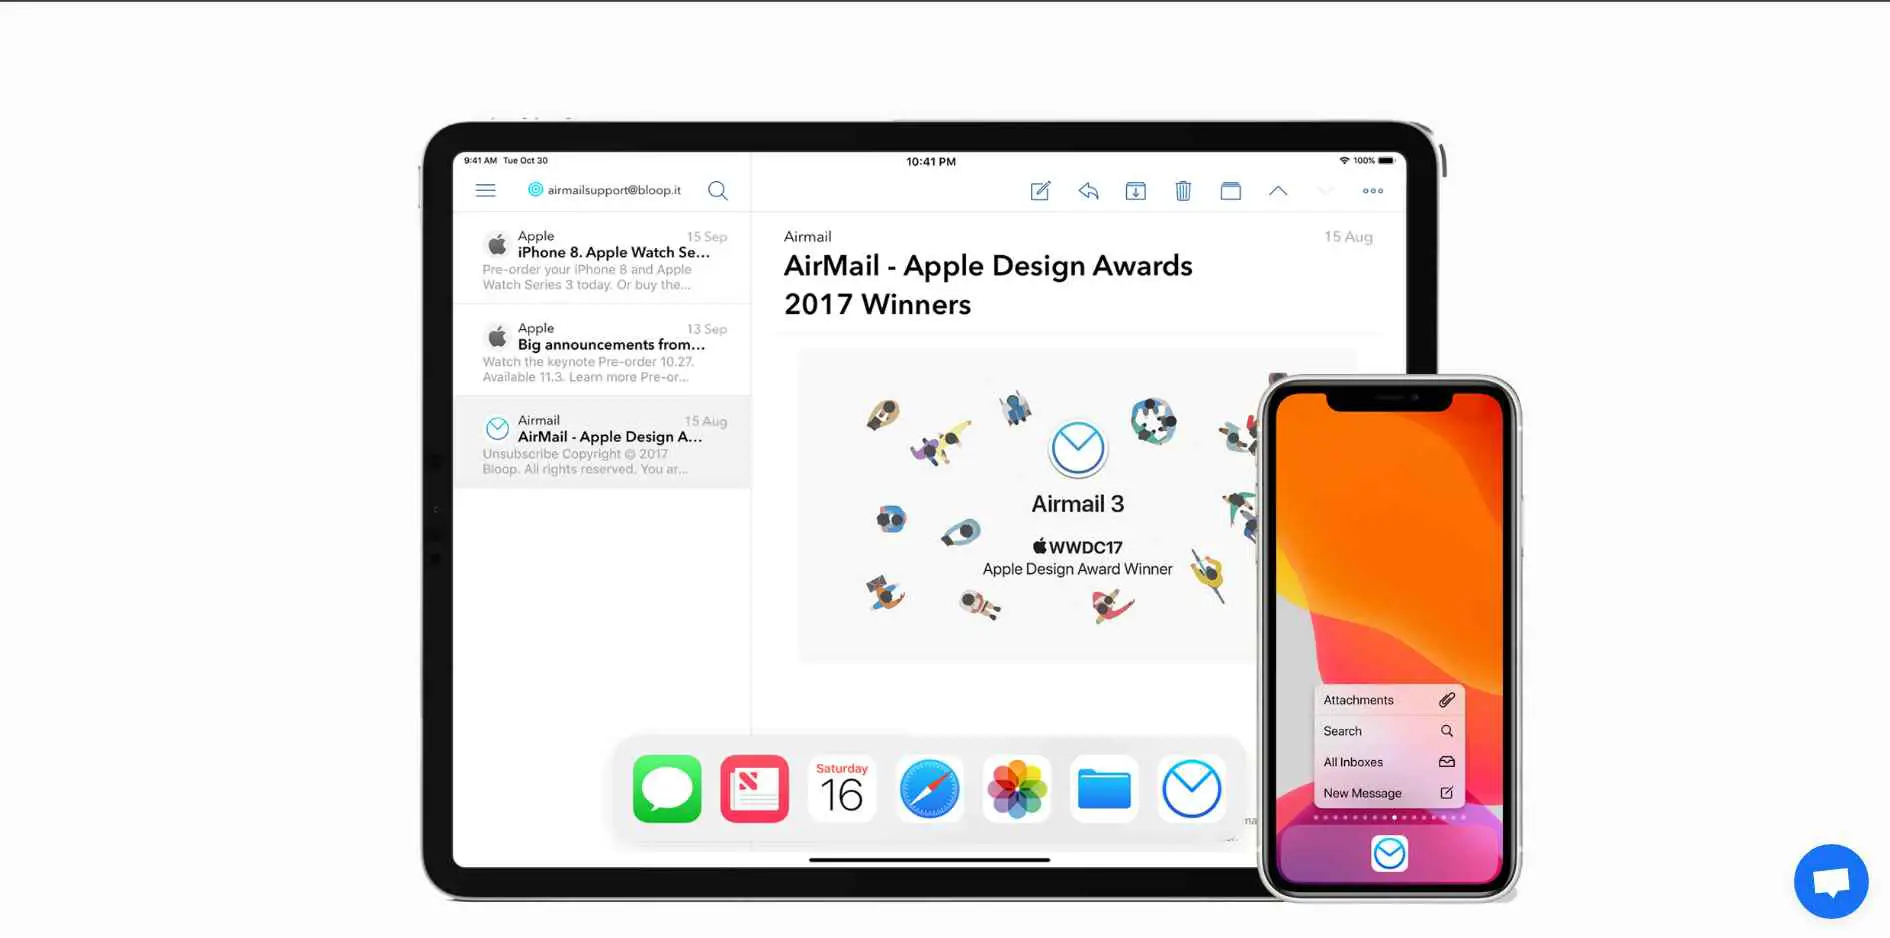 Airmail is a powerful and flexible email client for Mac and iOS.